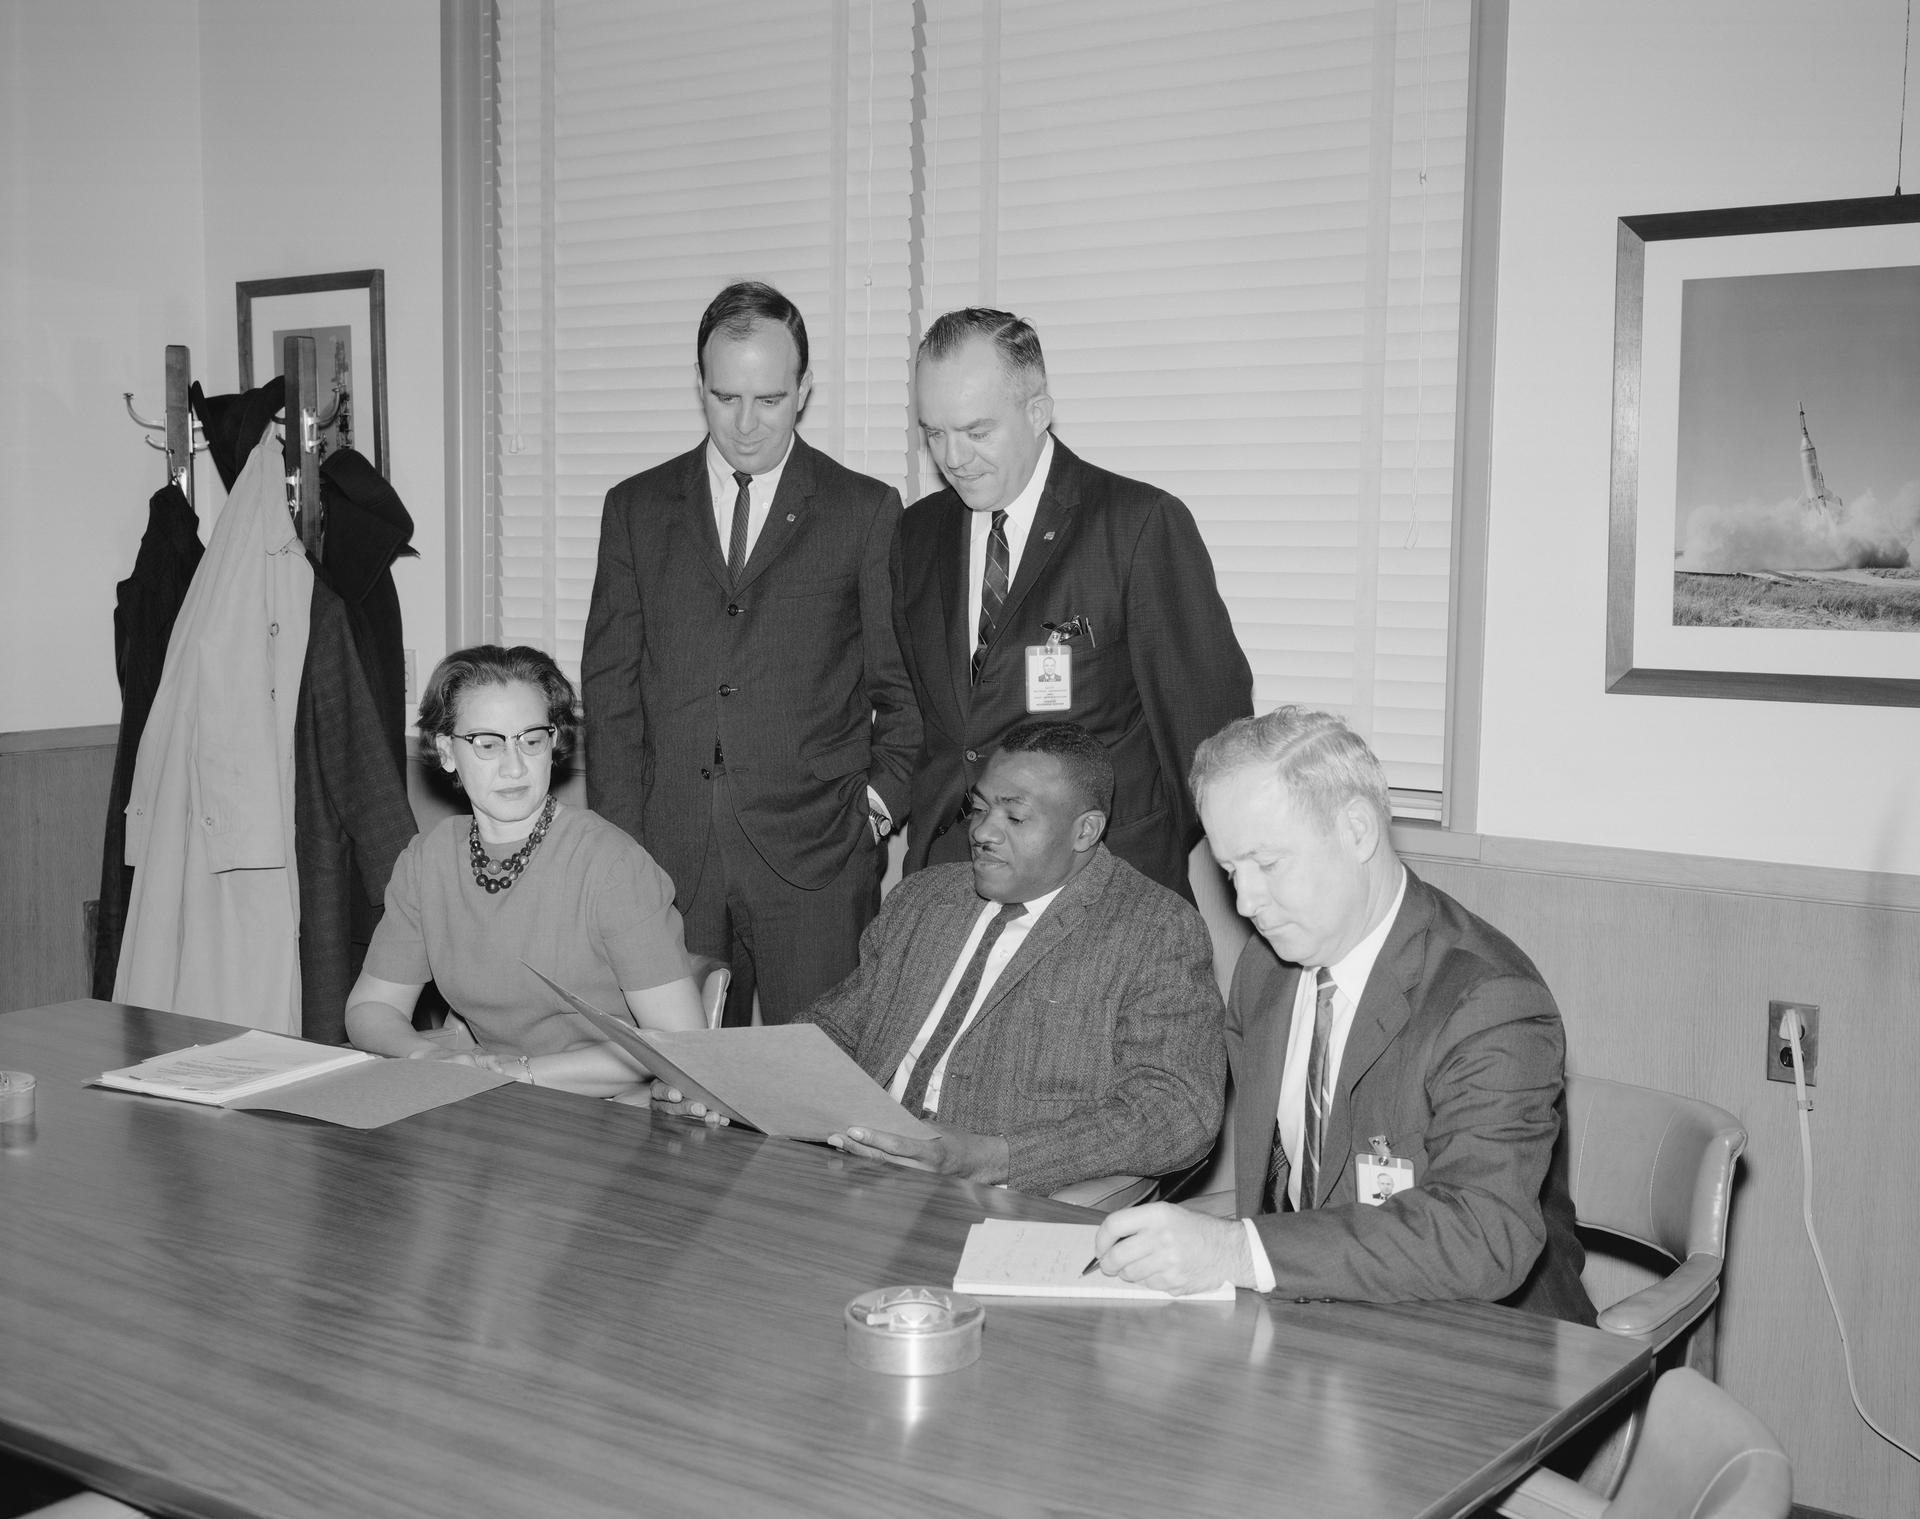 Seated from From Left: Katherine G Johnson, Lawrence W Brown, and J Norwood Evans, Employment Officer. Standing from Left: John J Cox, secretary; and Edward T Maher